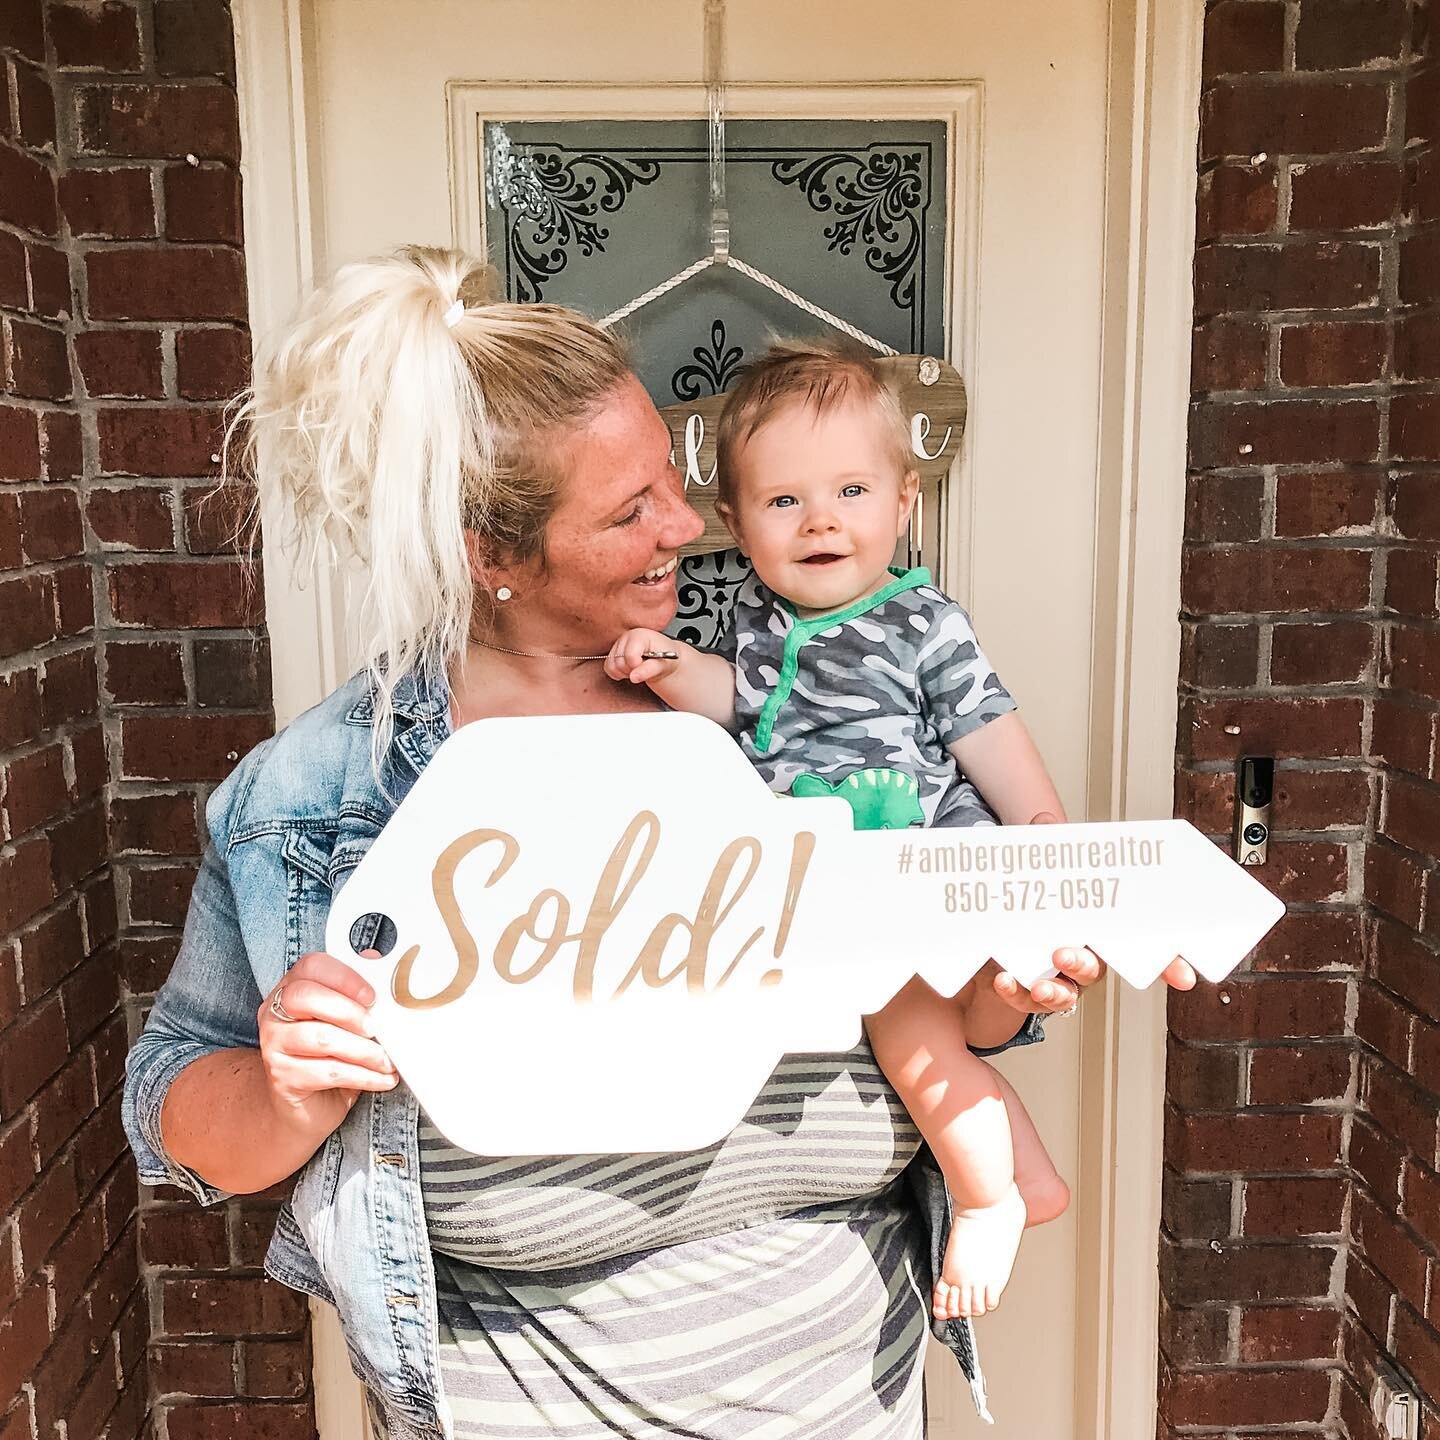 Made a new sign for our awesome realtor,  @ambergreenrealtor 🏡 🔑 
We can customize one for you today! Just PM me if interested. This one is fresh out of the laser and hasn&rsquo;t even been listed yet! 😍
#soldsign #realtorsign #closingday #closing